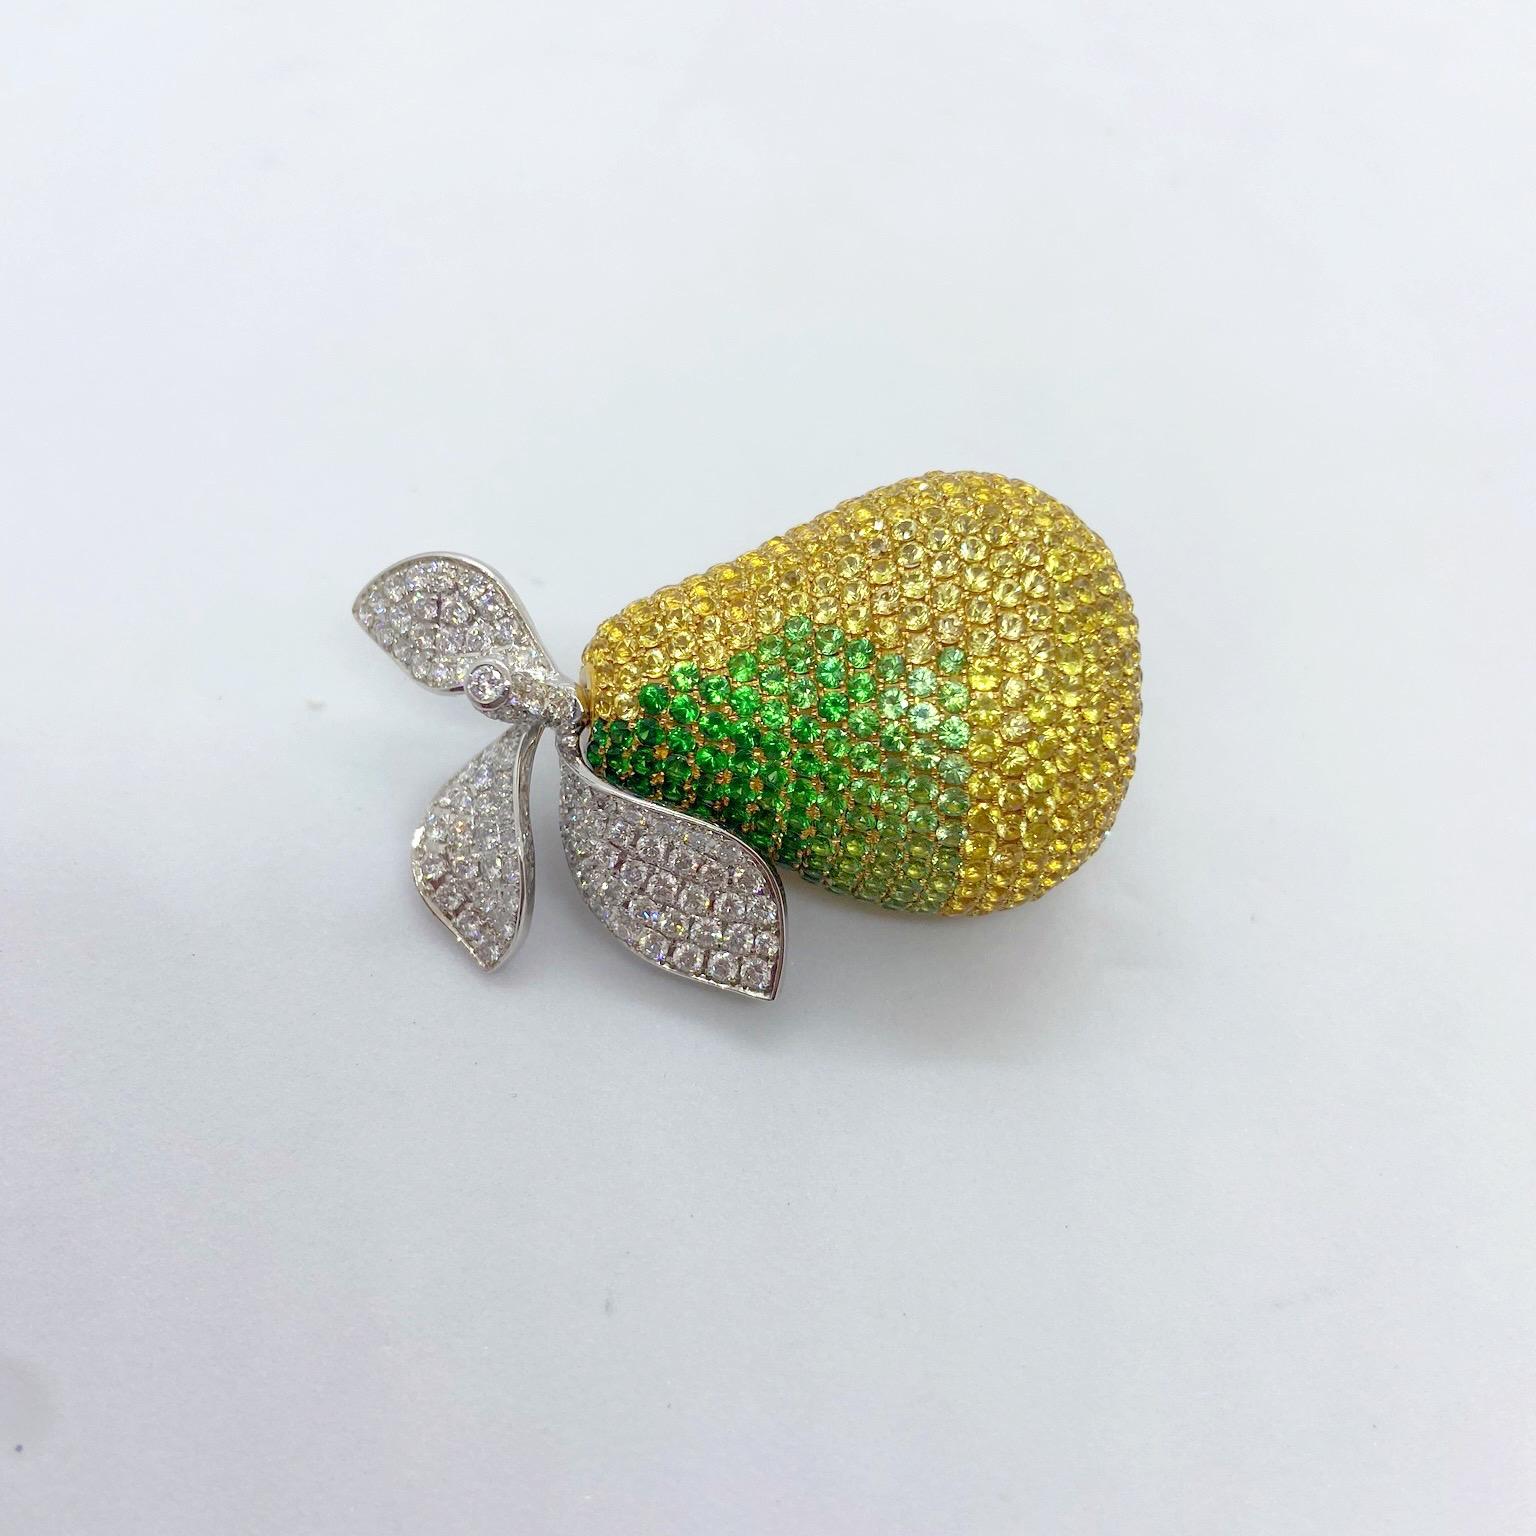 An 18 karat yellow and white gold multi dimensional pear brooch. The yellow gold pear is meticulously set with round Yellow Sapphires and an ombre of round Green Tsavorites. The white gold leaves are set with round brilliant Diamonds. The pear